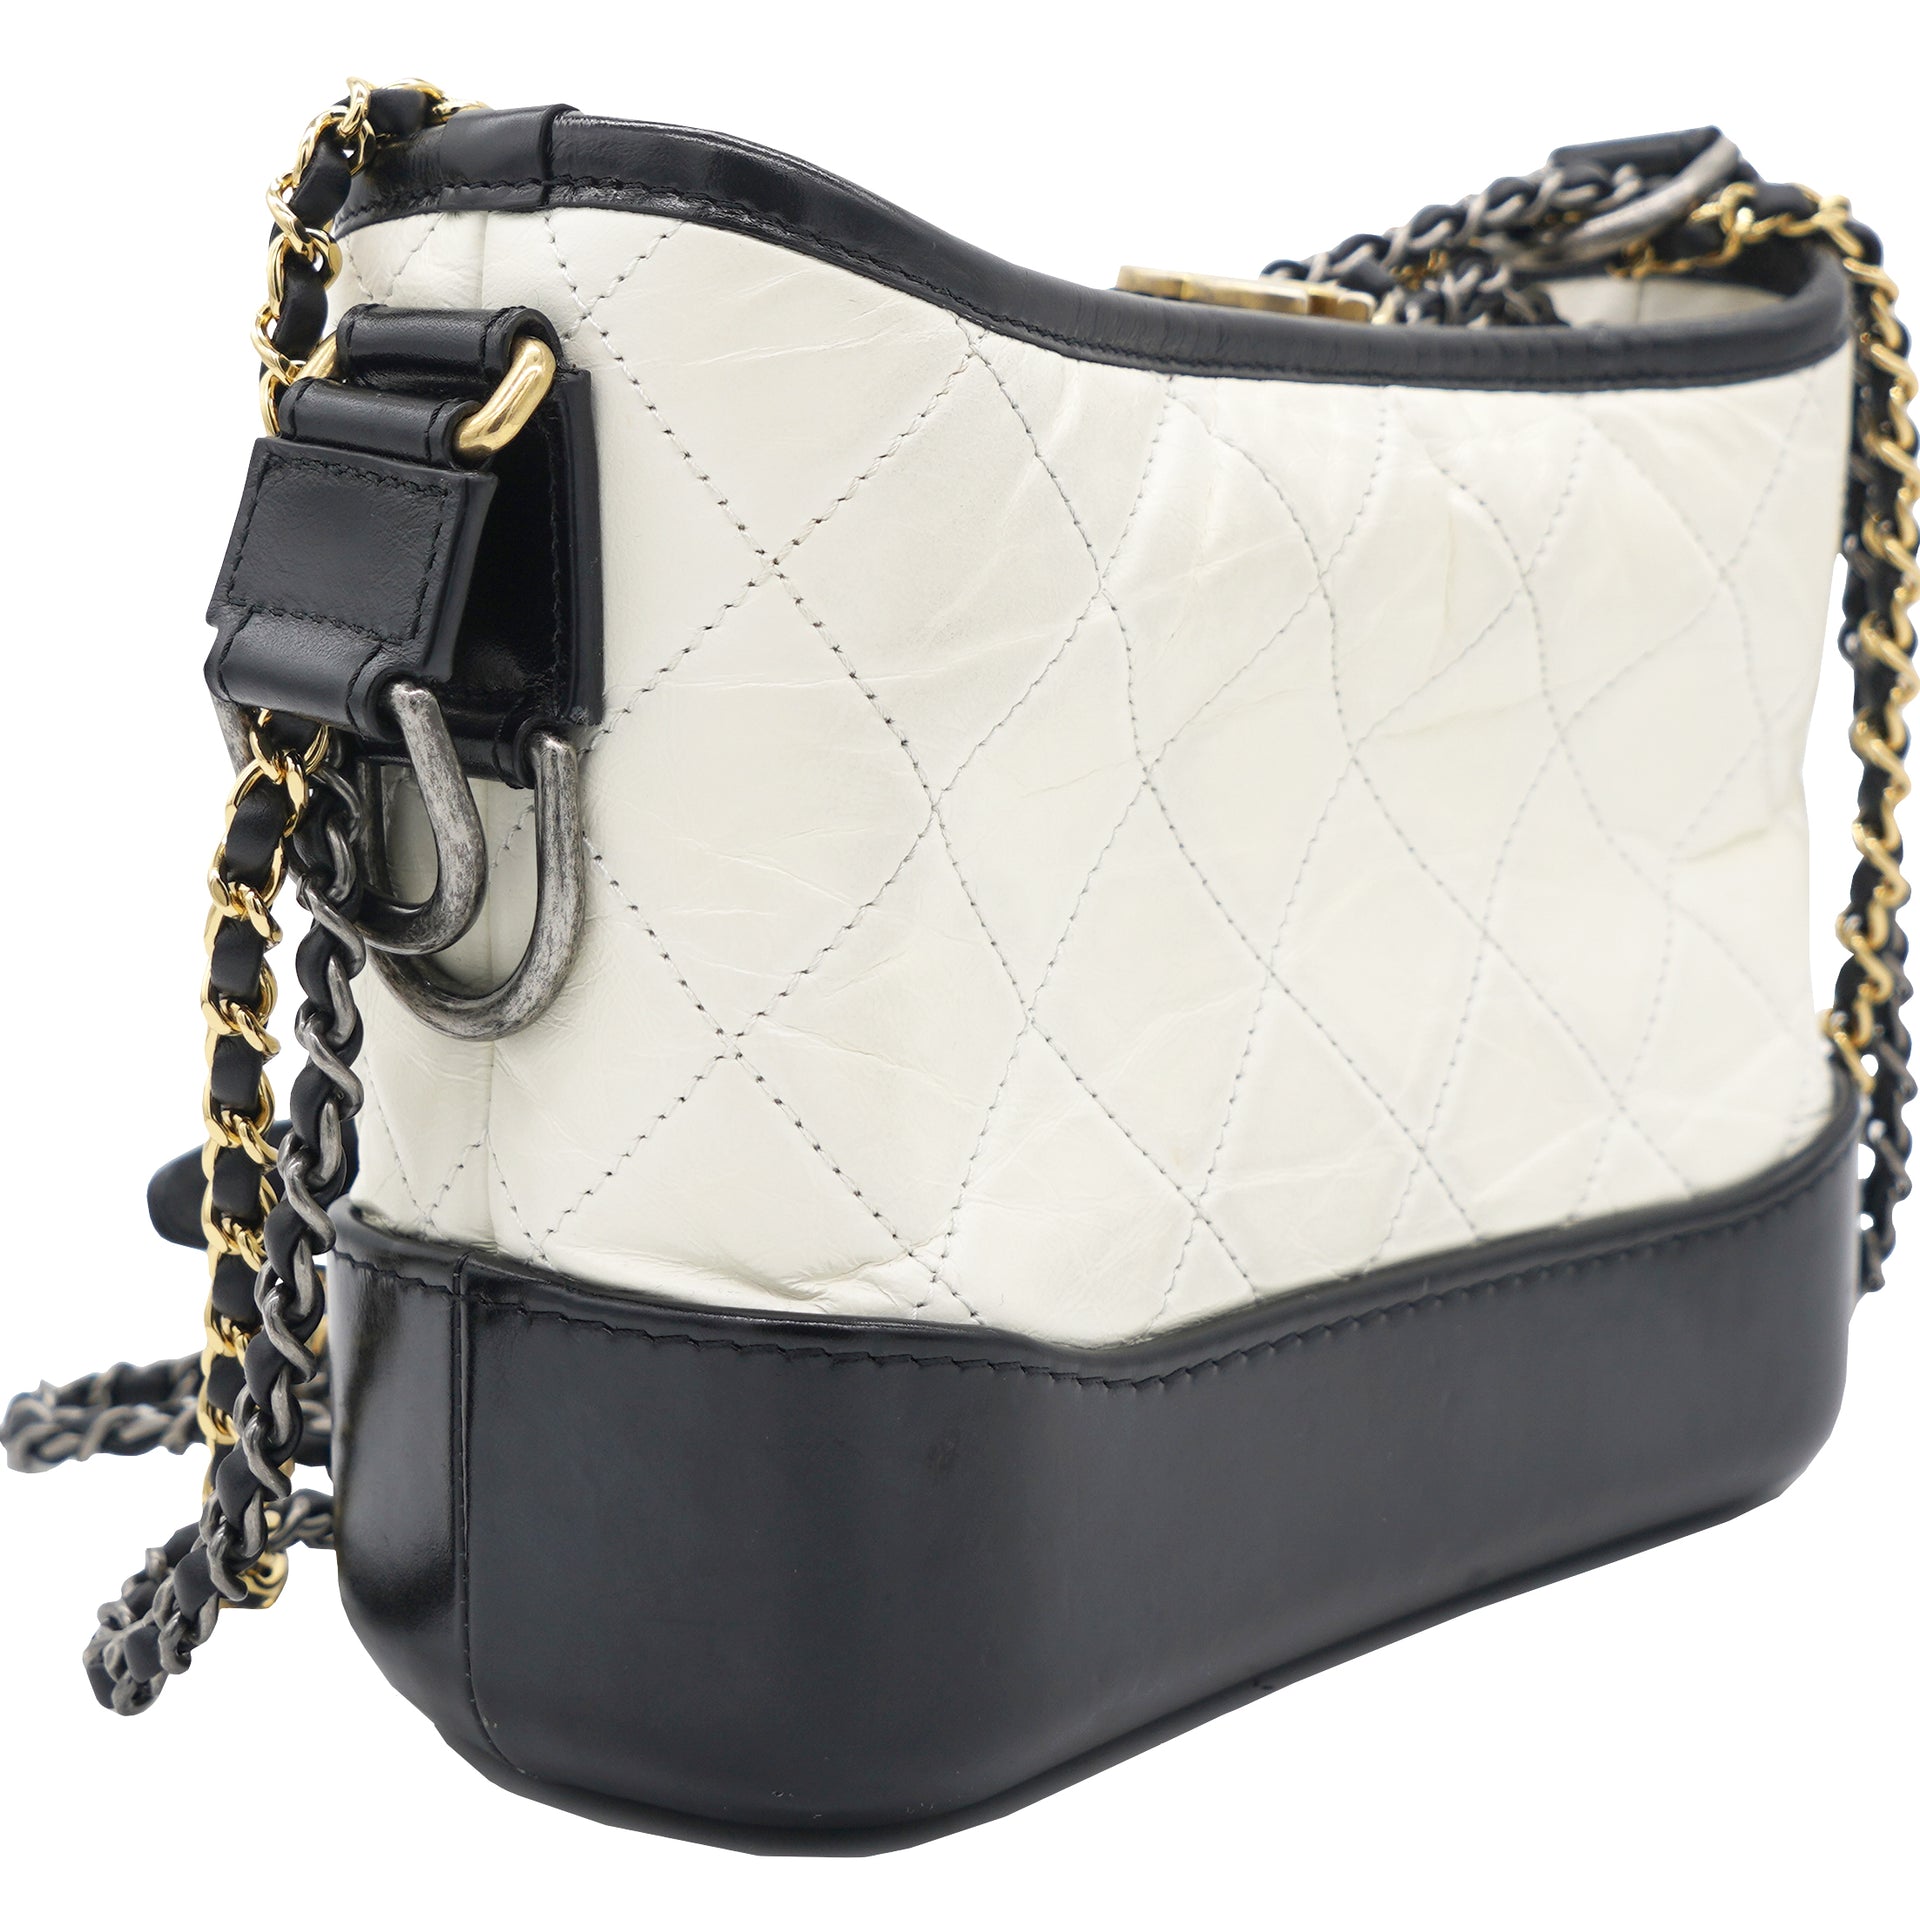 Chanel Gabrielle - 154 For Sale on 1stDibs  chanel gabrielle backpack, gabrielle  chanel small, small gabrielle bag